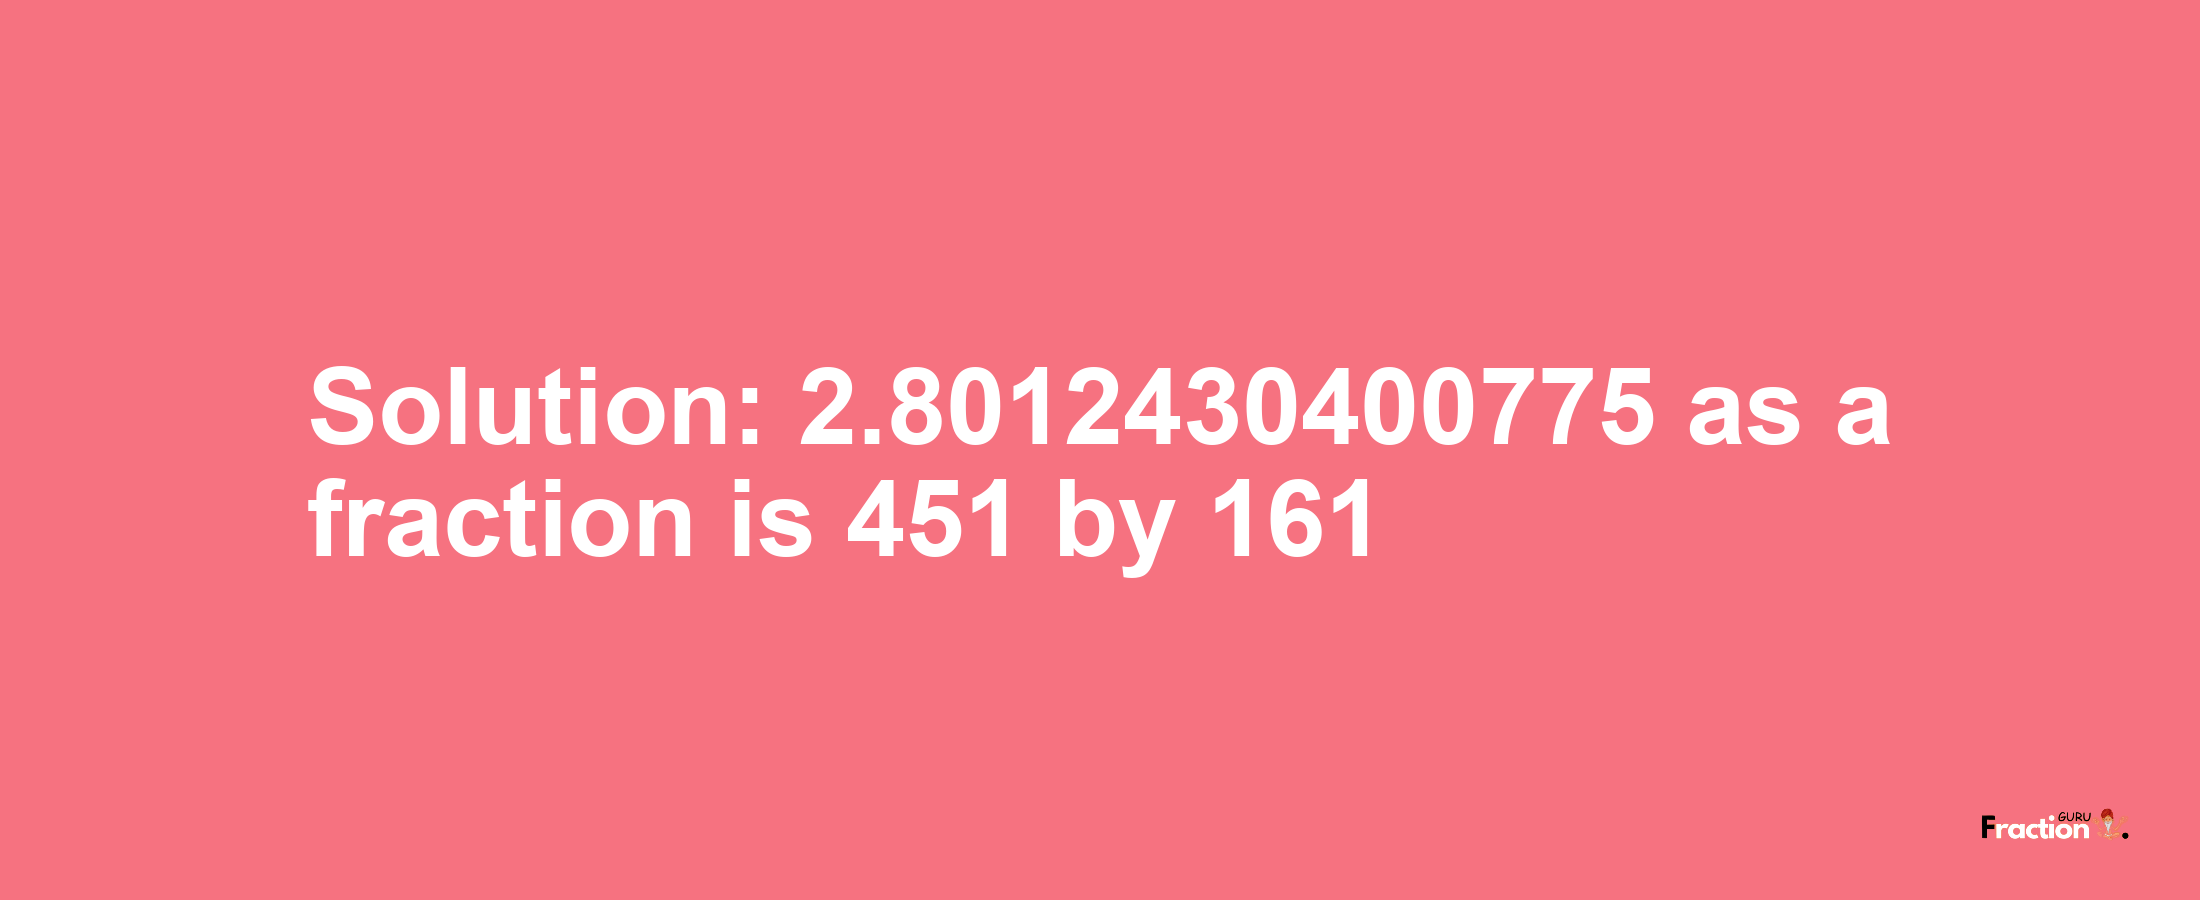 Solution:2.8012430400775 as a fraction is 451/161